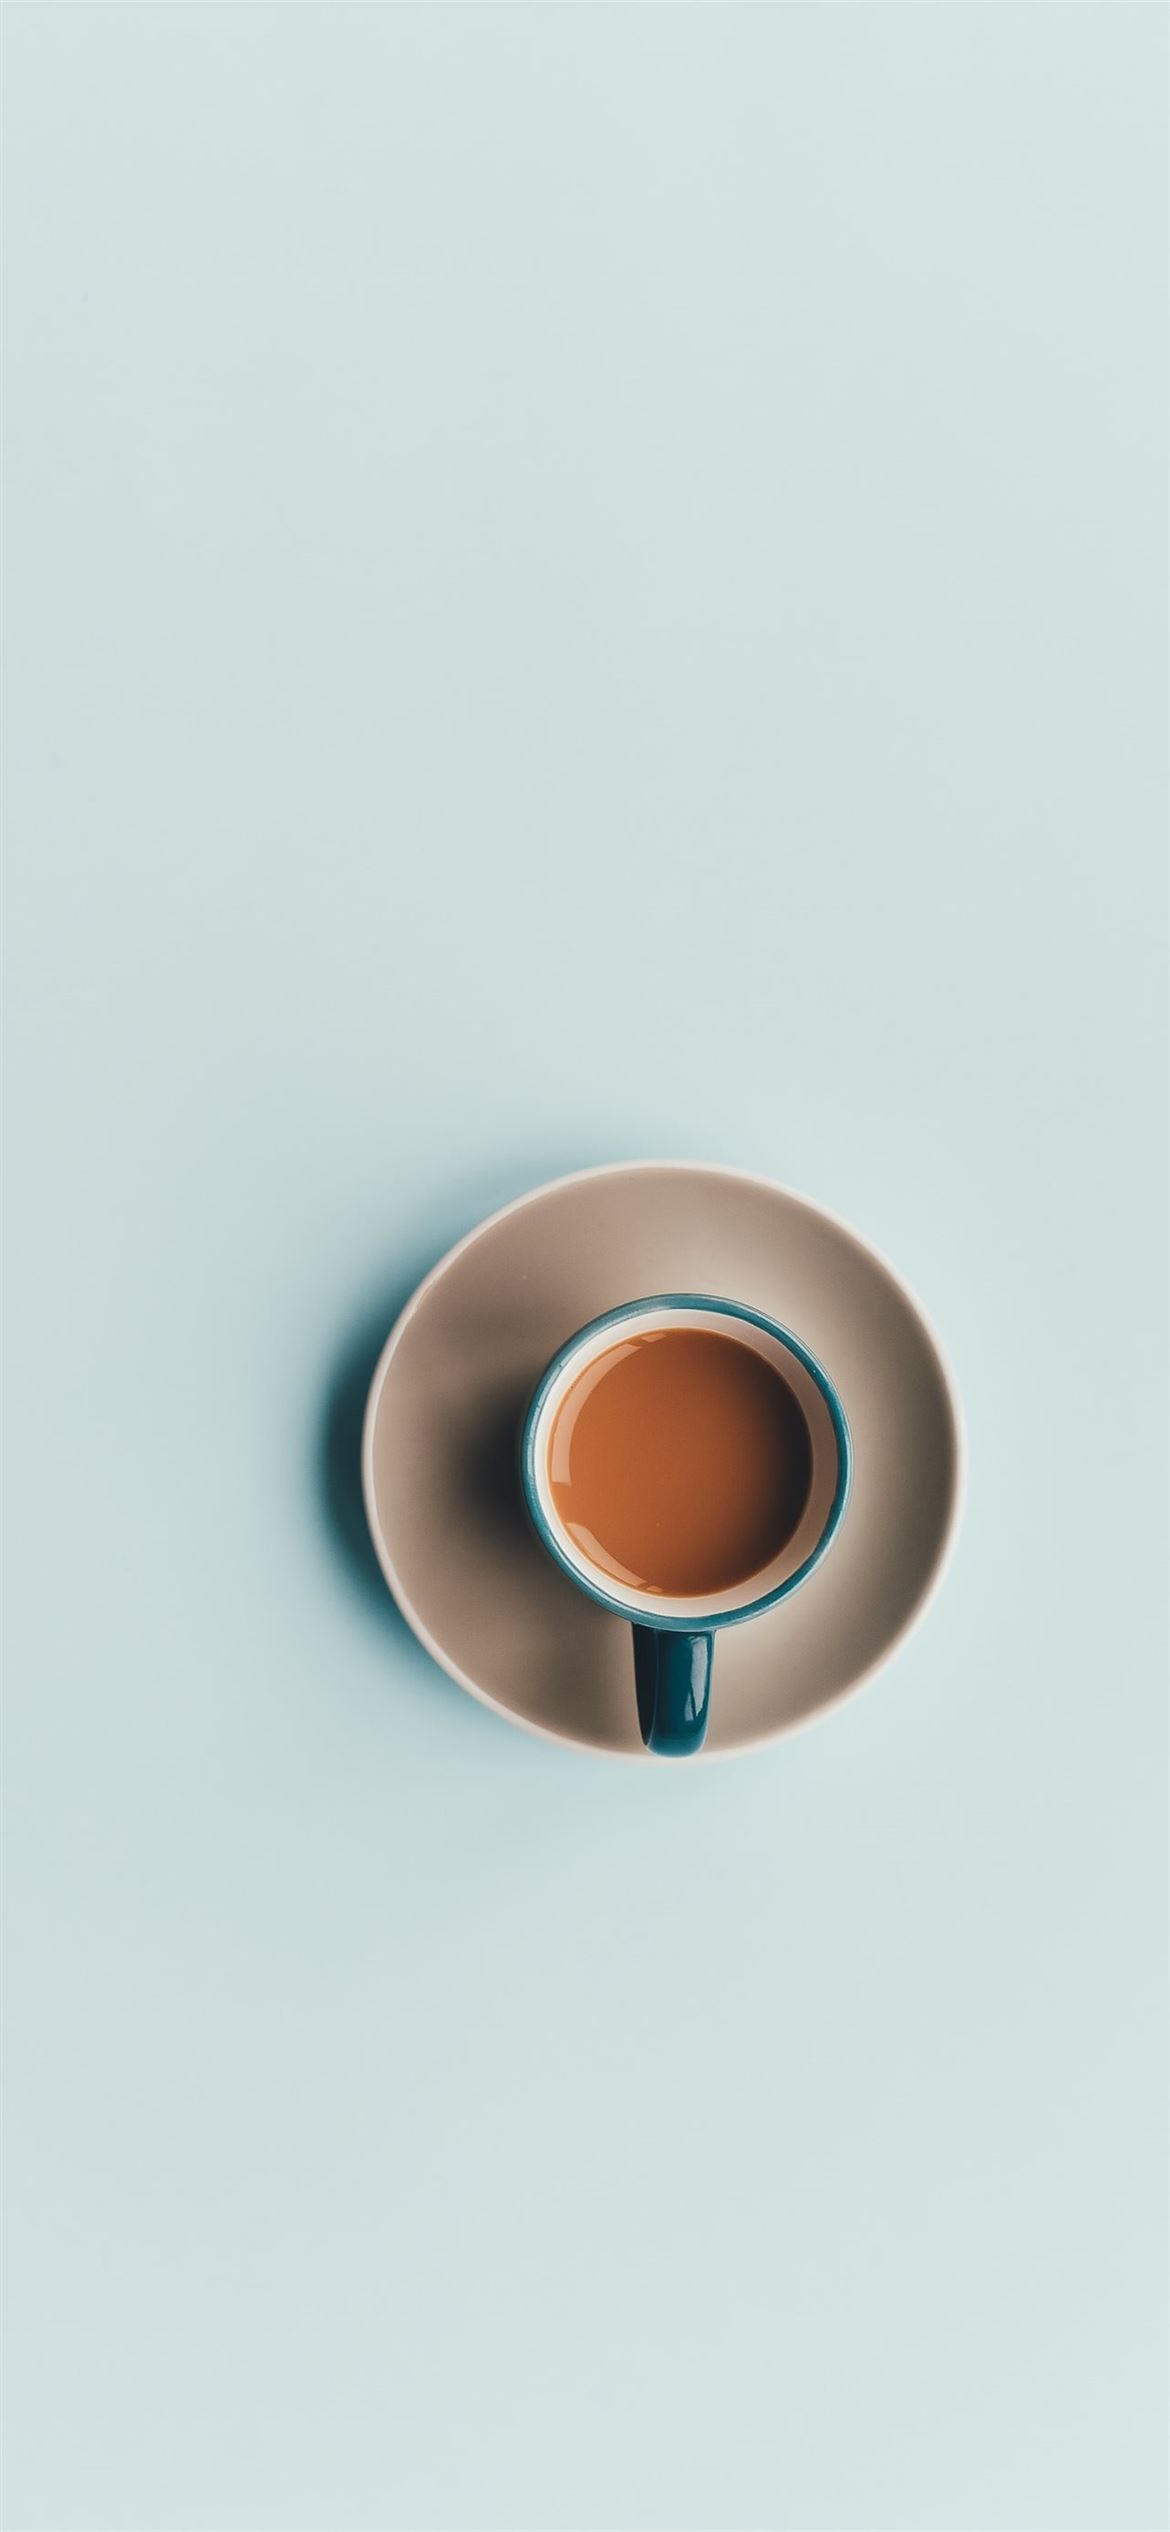 A cup of coffee on a saucer on a blue background - Coffee